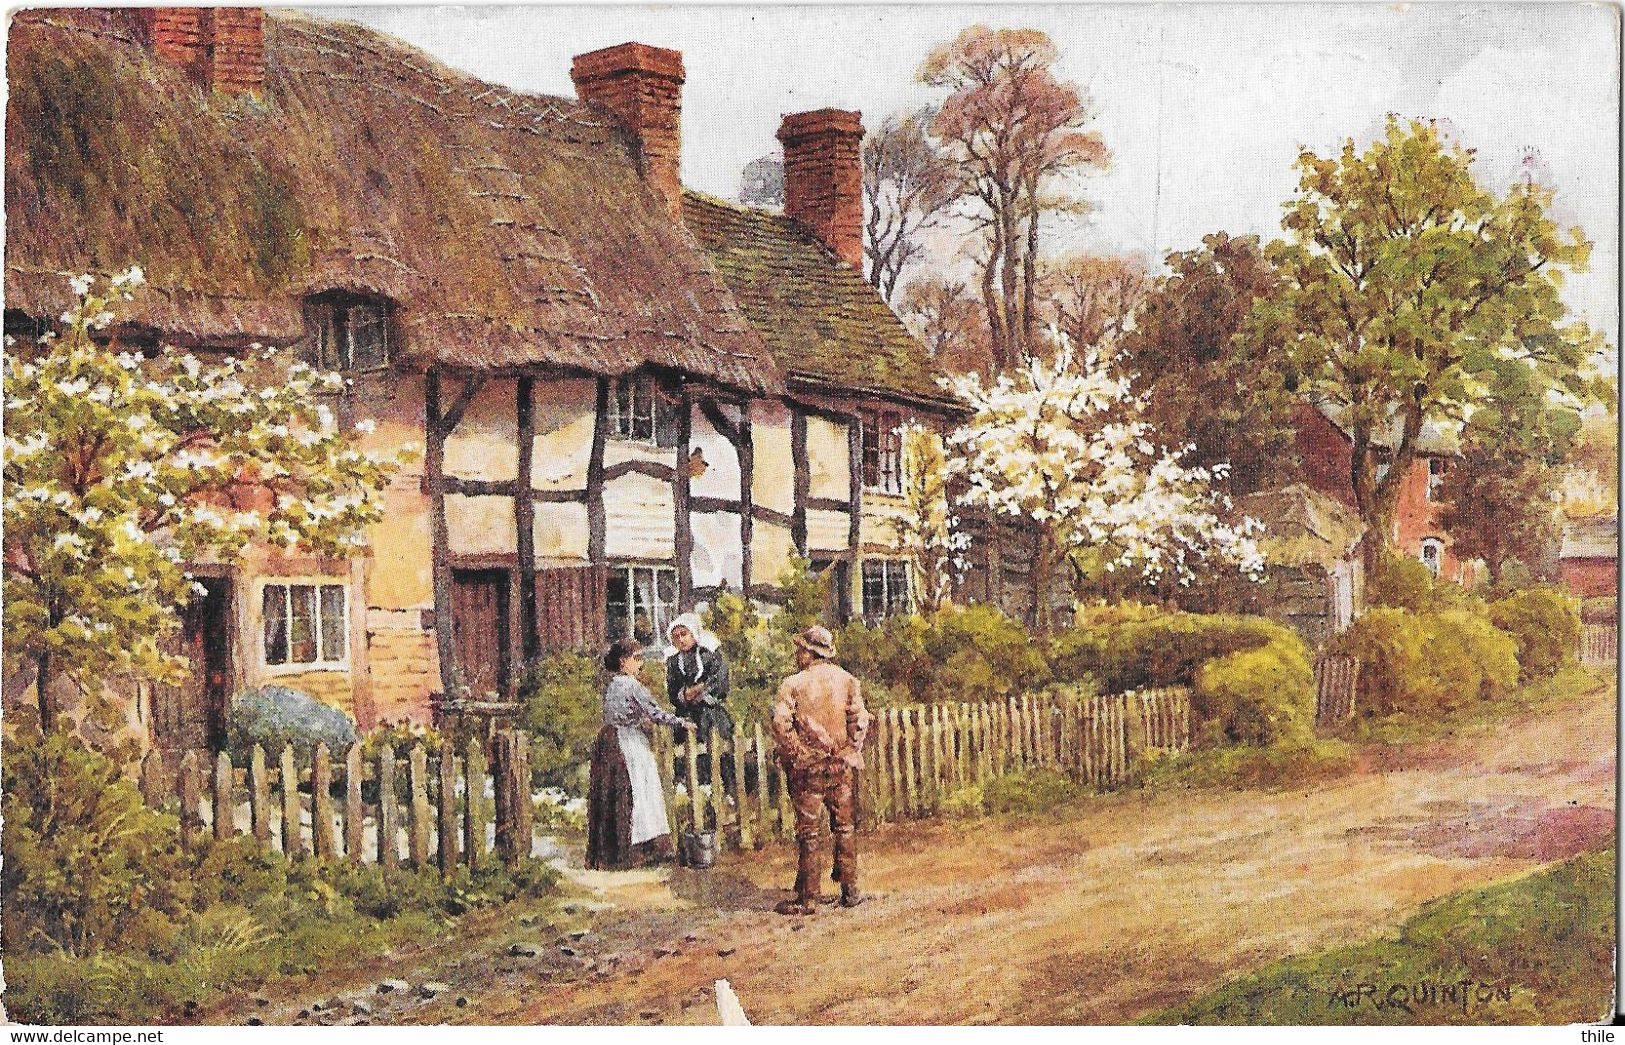 A.R. Quinton - Cottages At Welford-on-Avon In Gloucestershire - Quinton, AR